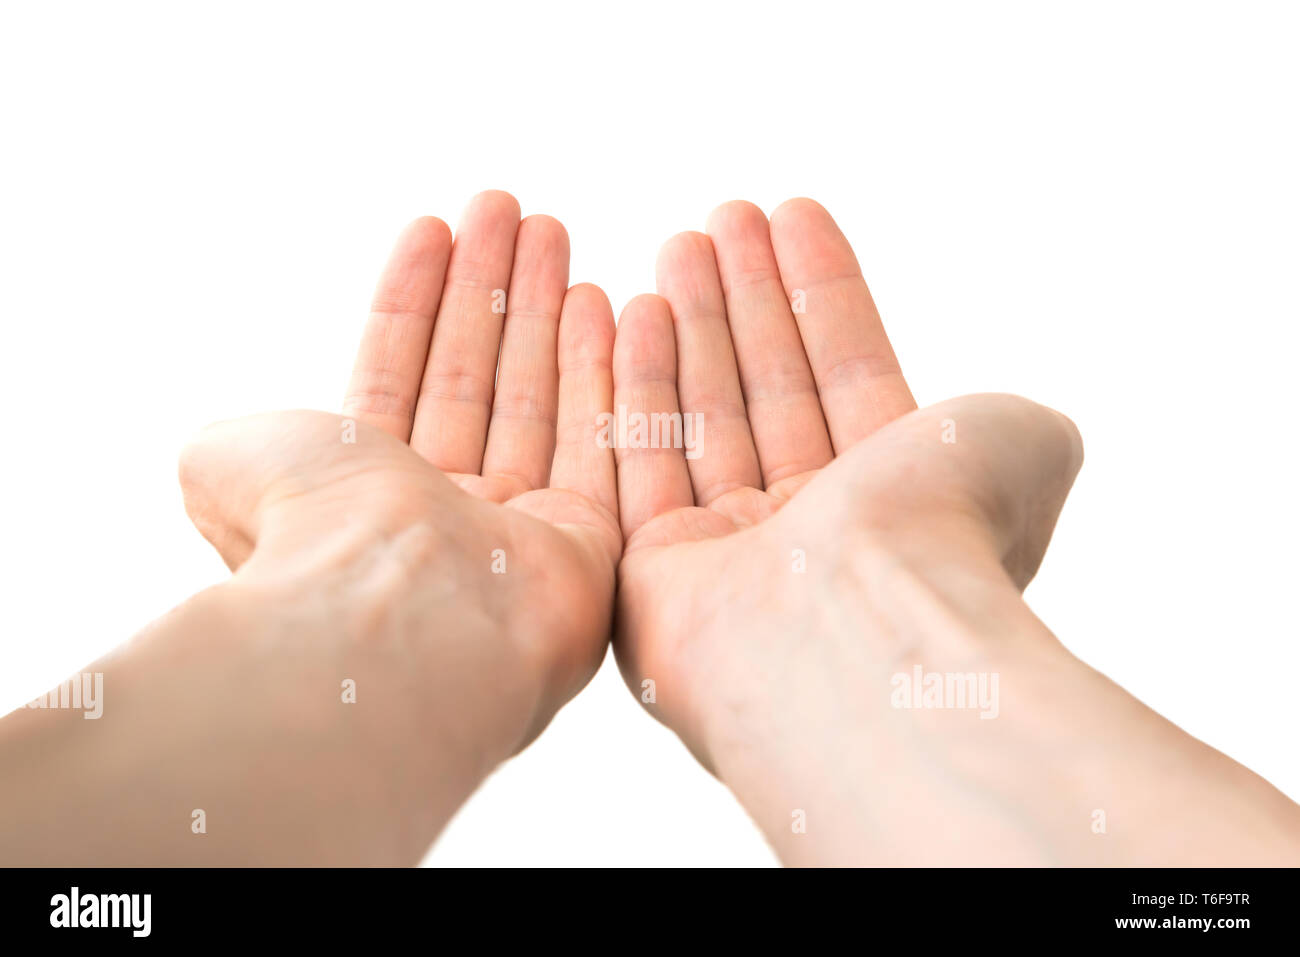 Two open hands giving something Stock Photo